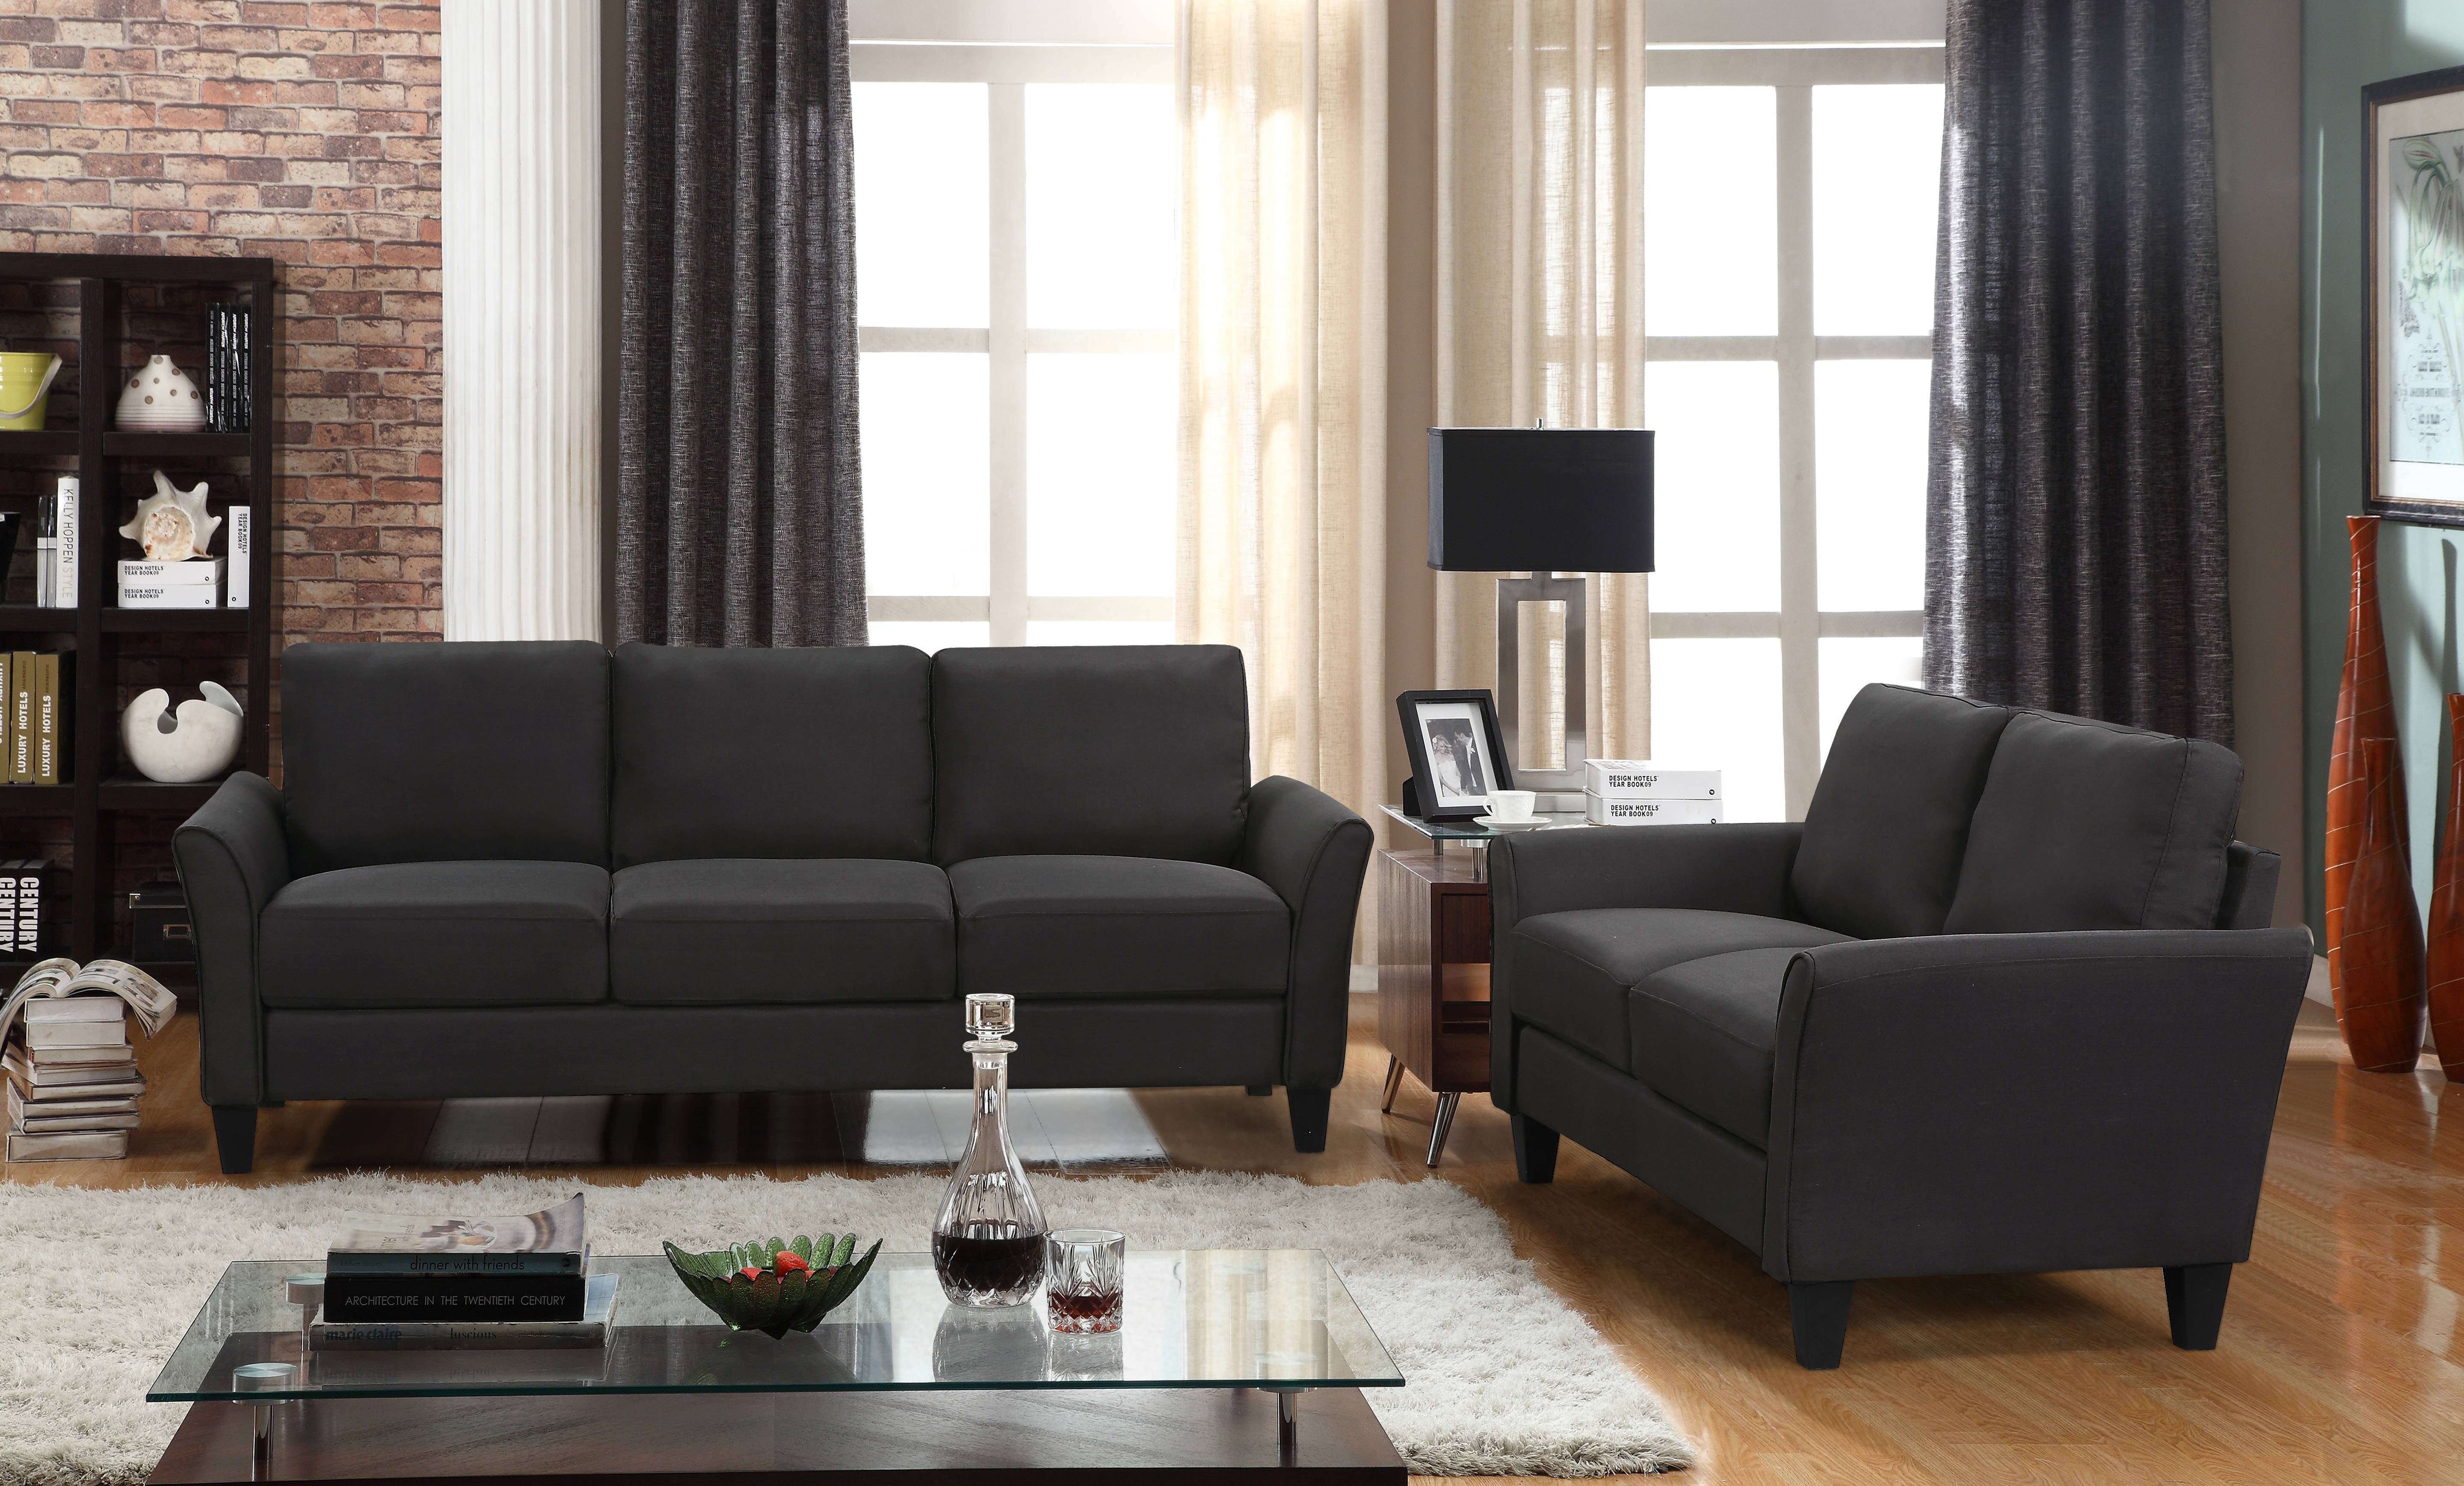 Clearance! Modern Sectional Sofas Set with 3 Seat Sofa, Loveseat and